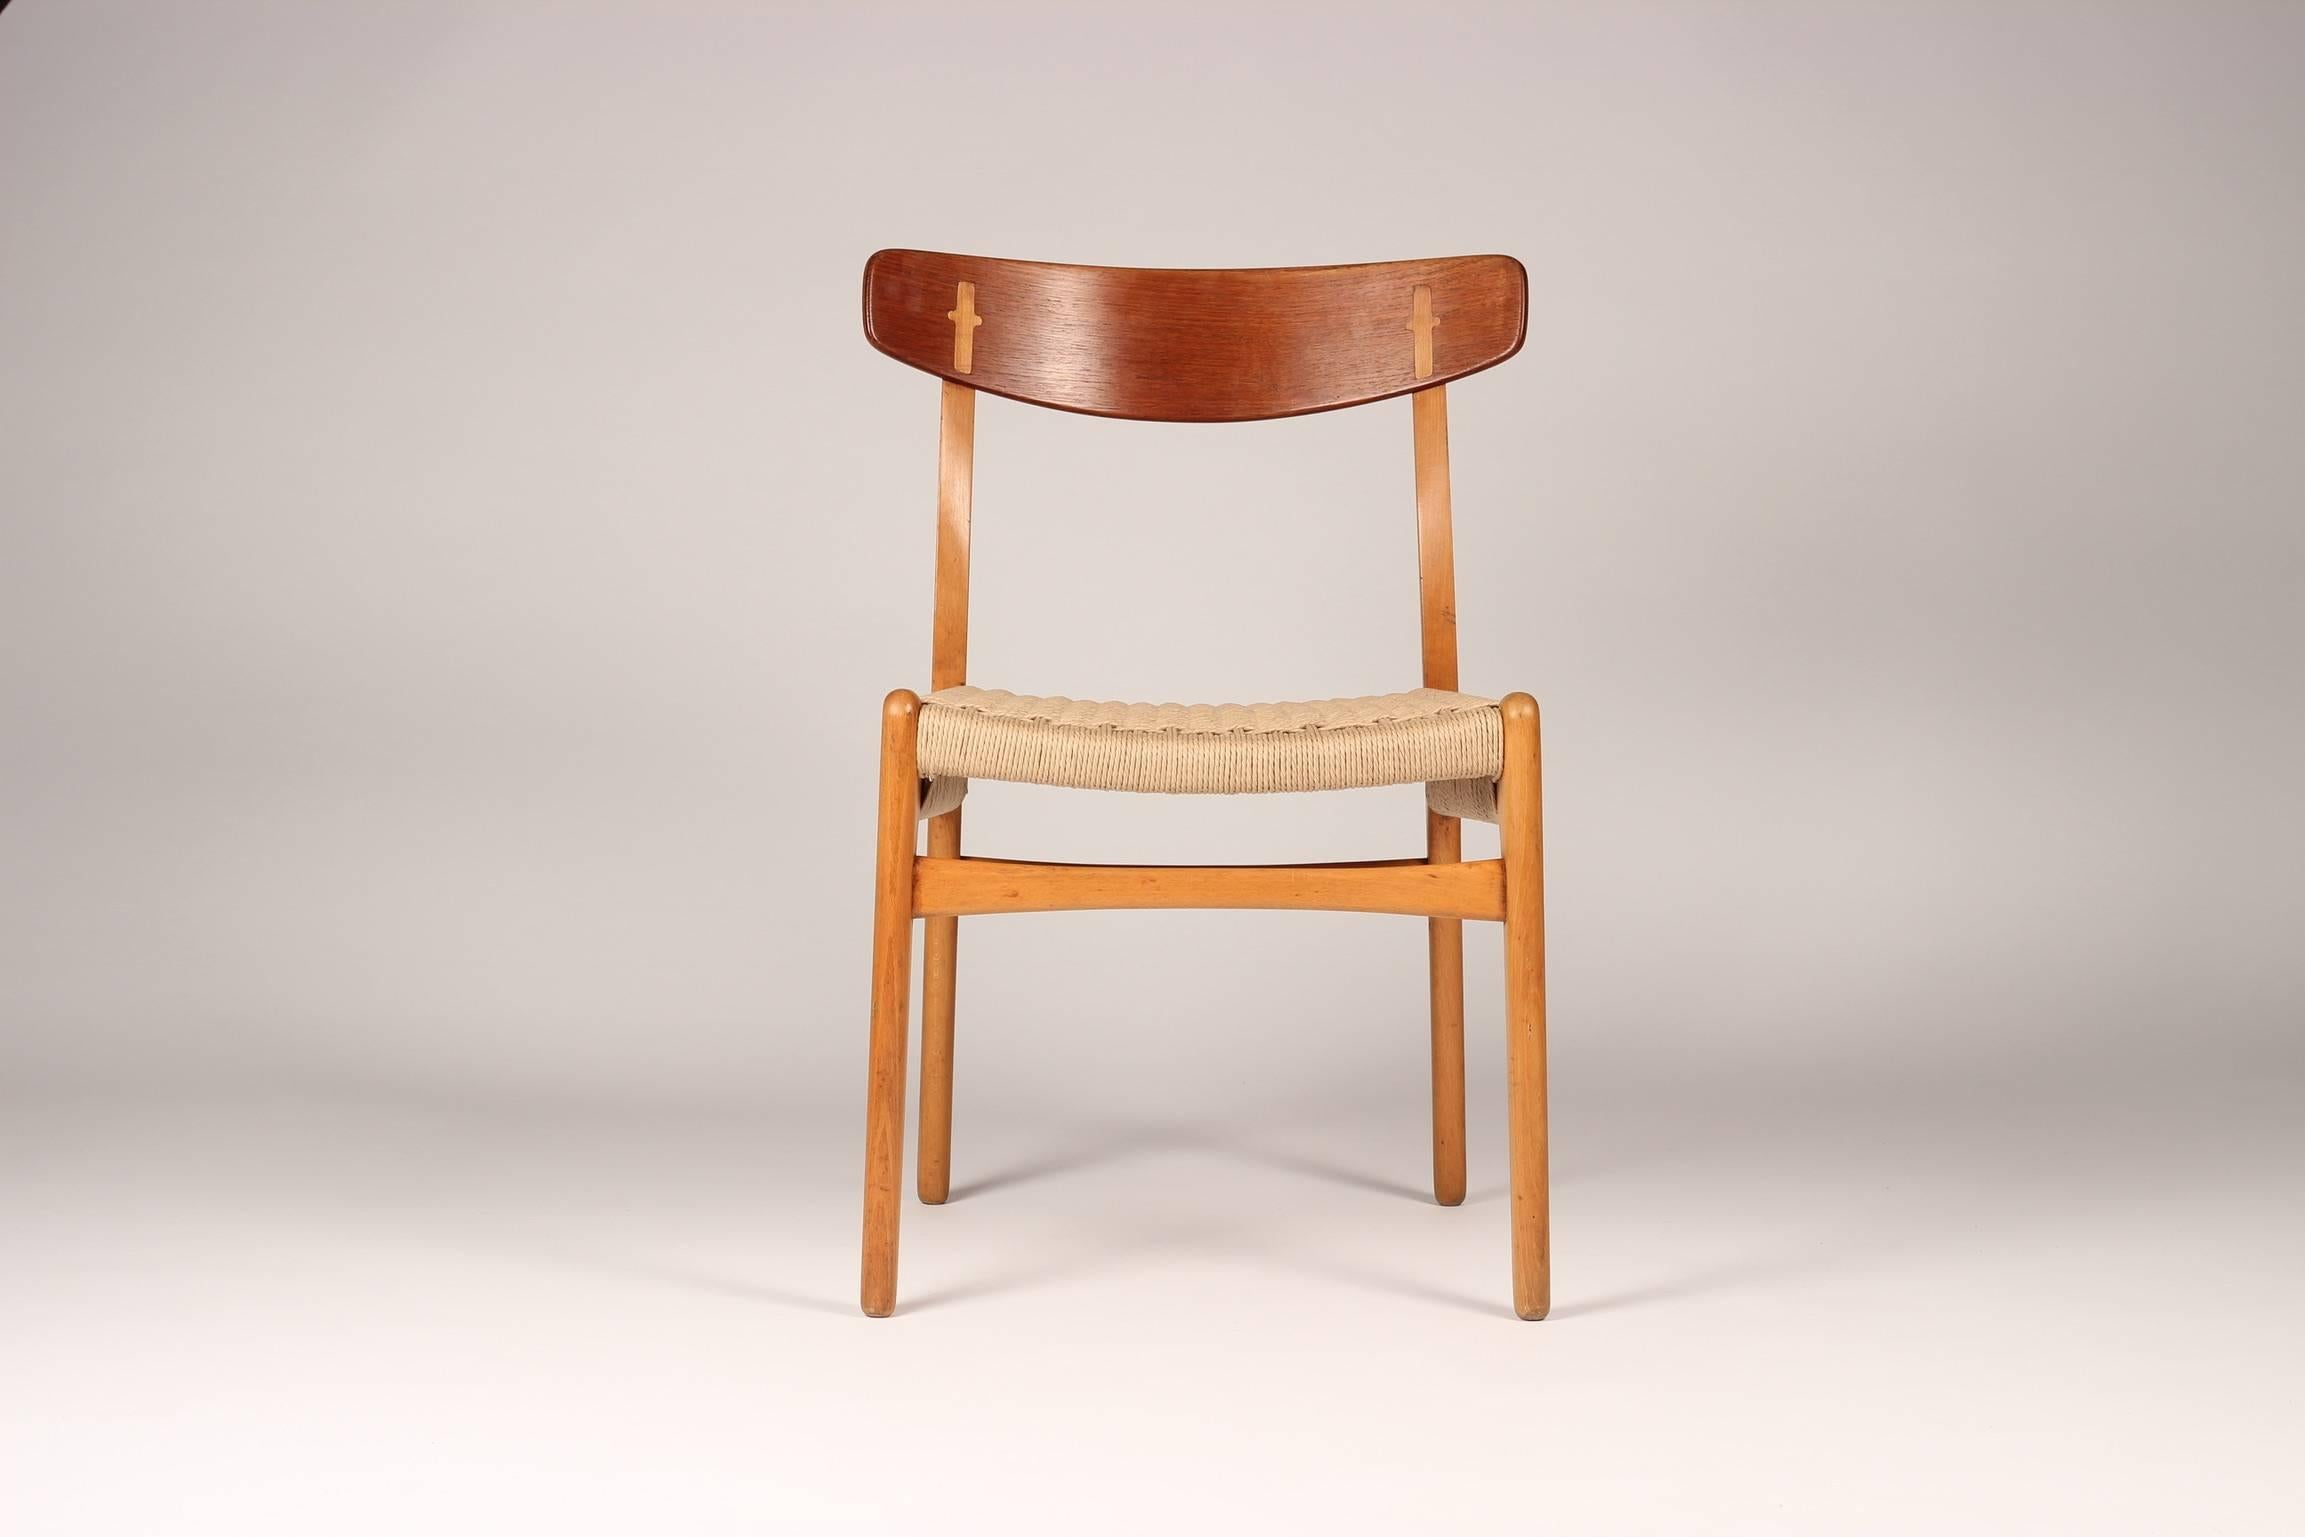 An early design from the master Hans Wegner's hand for Carl Hansen & Søn, this beautifully and sympathetically cleaned, restored and re-Danish corded set of chairs are in wonderful condition and ready to be appreciated for another 60 years of